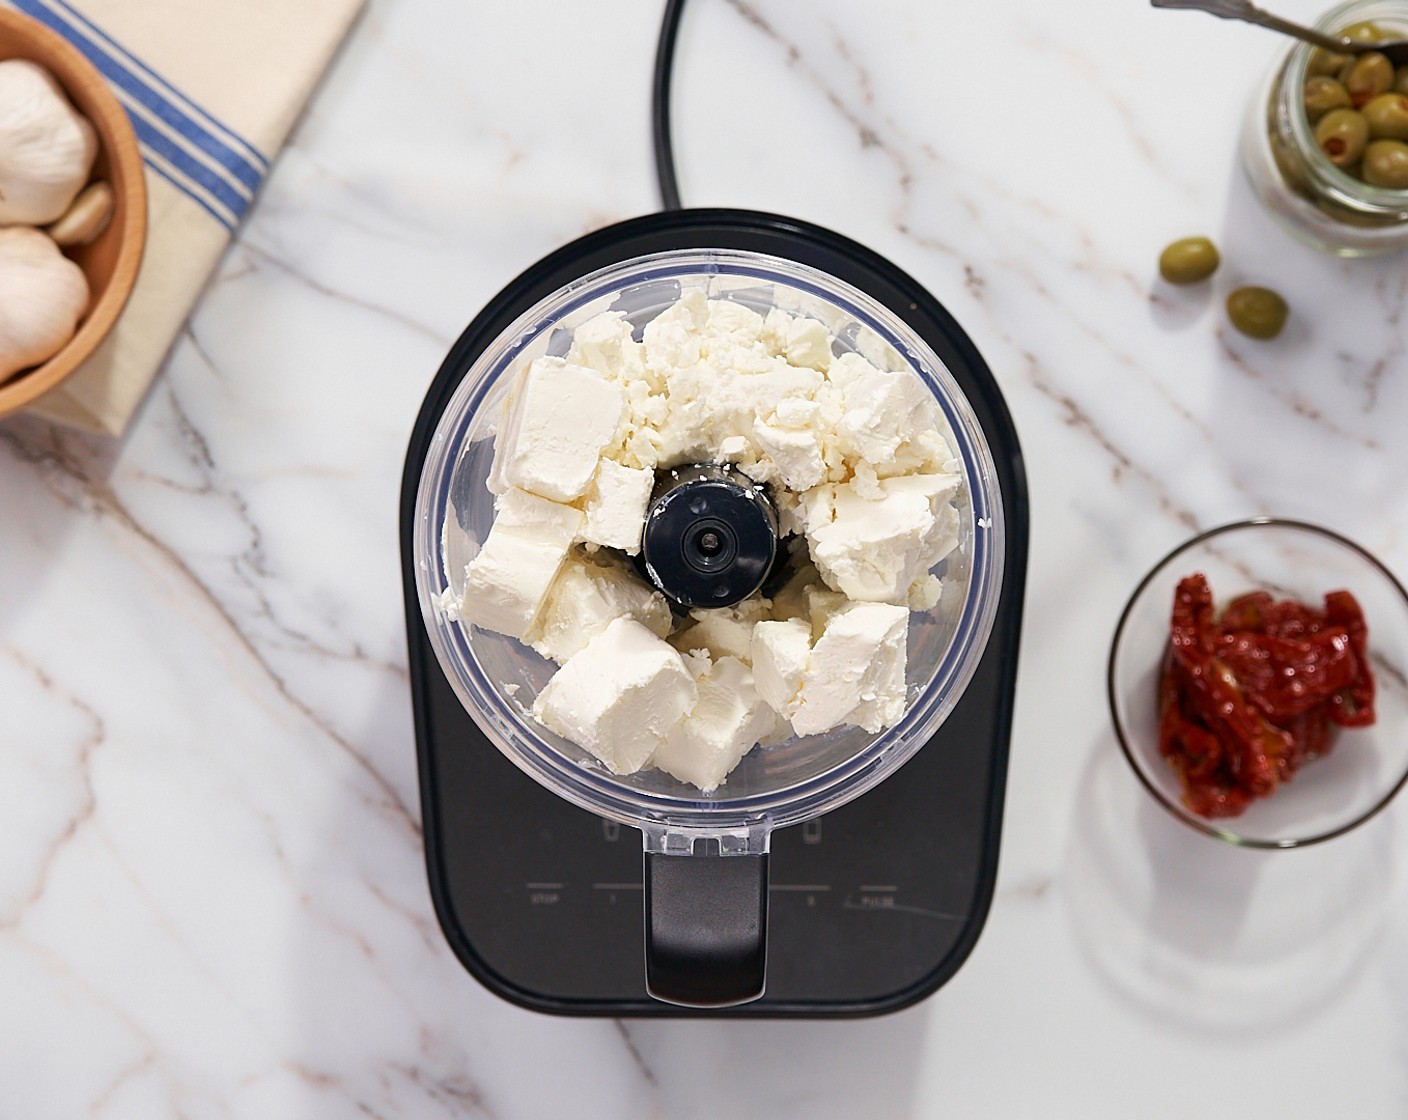 step 1 Add Feta Cheese (1 1/2 cups) and Philadelphia Original Soft Cheese (1/2 cup) to a food processor or blender. Blend until smooth and creamy.